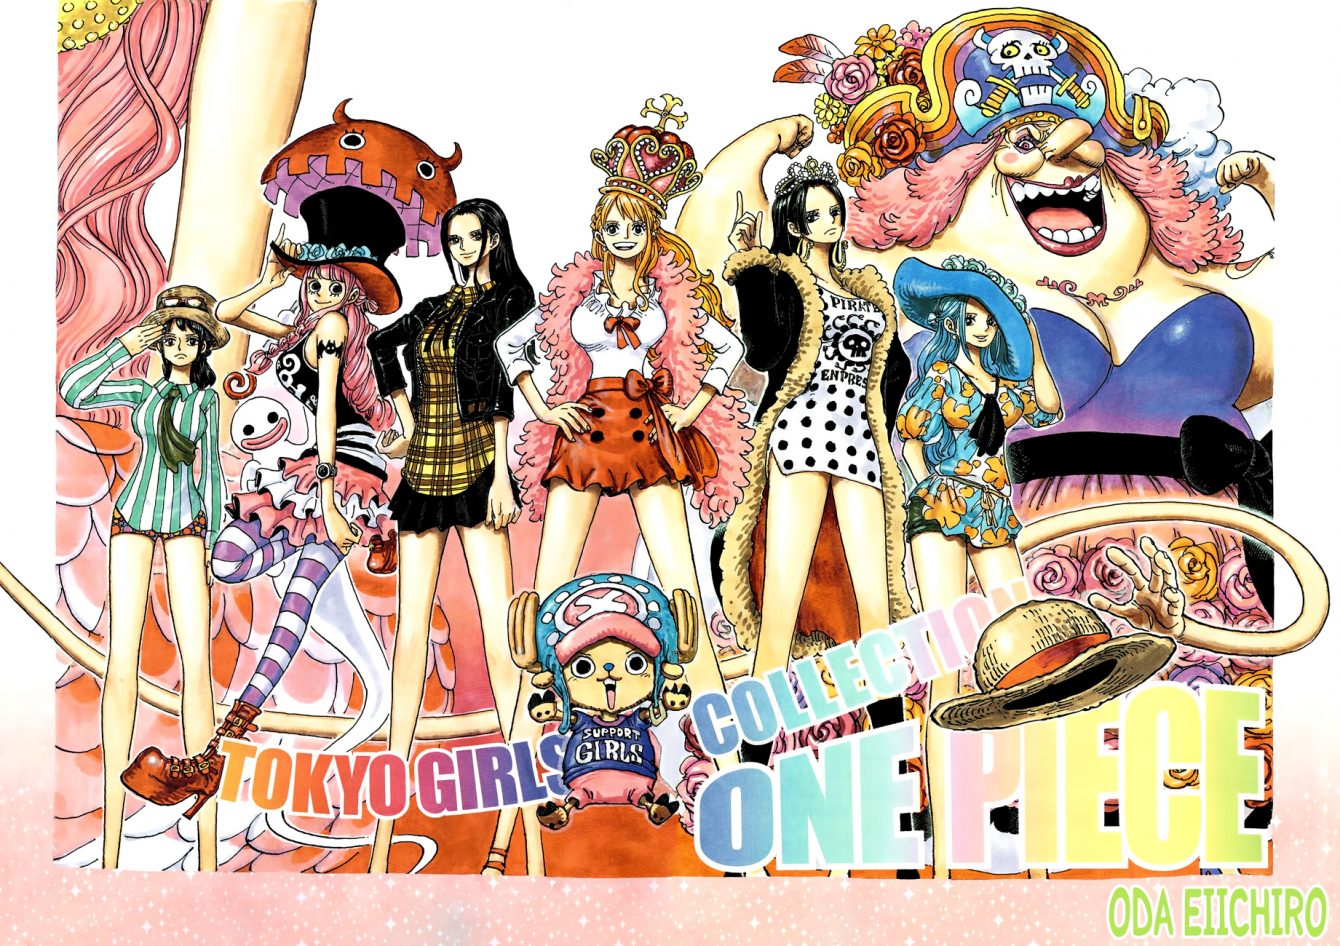 Cbr Takes Issue With One Piece S Female Characters Claims Oda S Designs Reinforce Harmful Stereotypes Bounding Into Comics